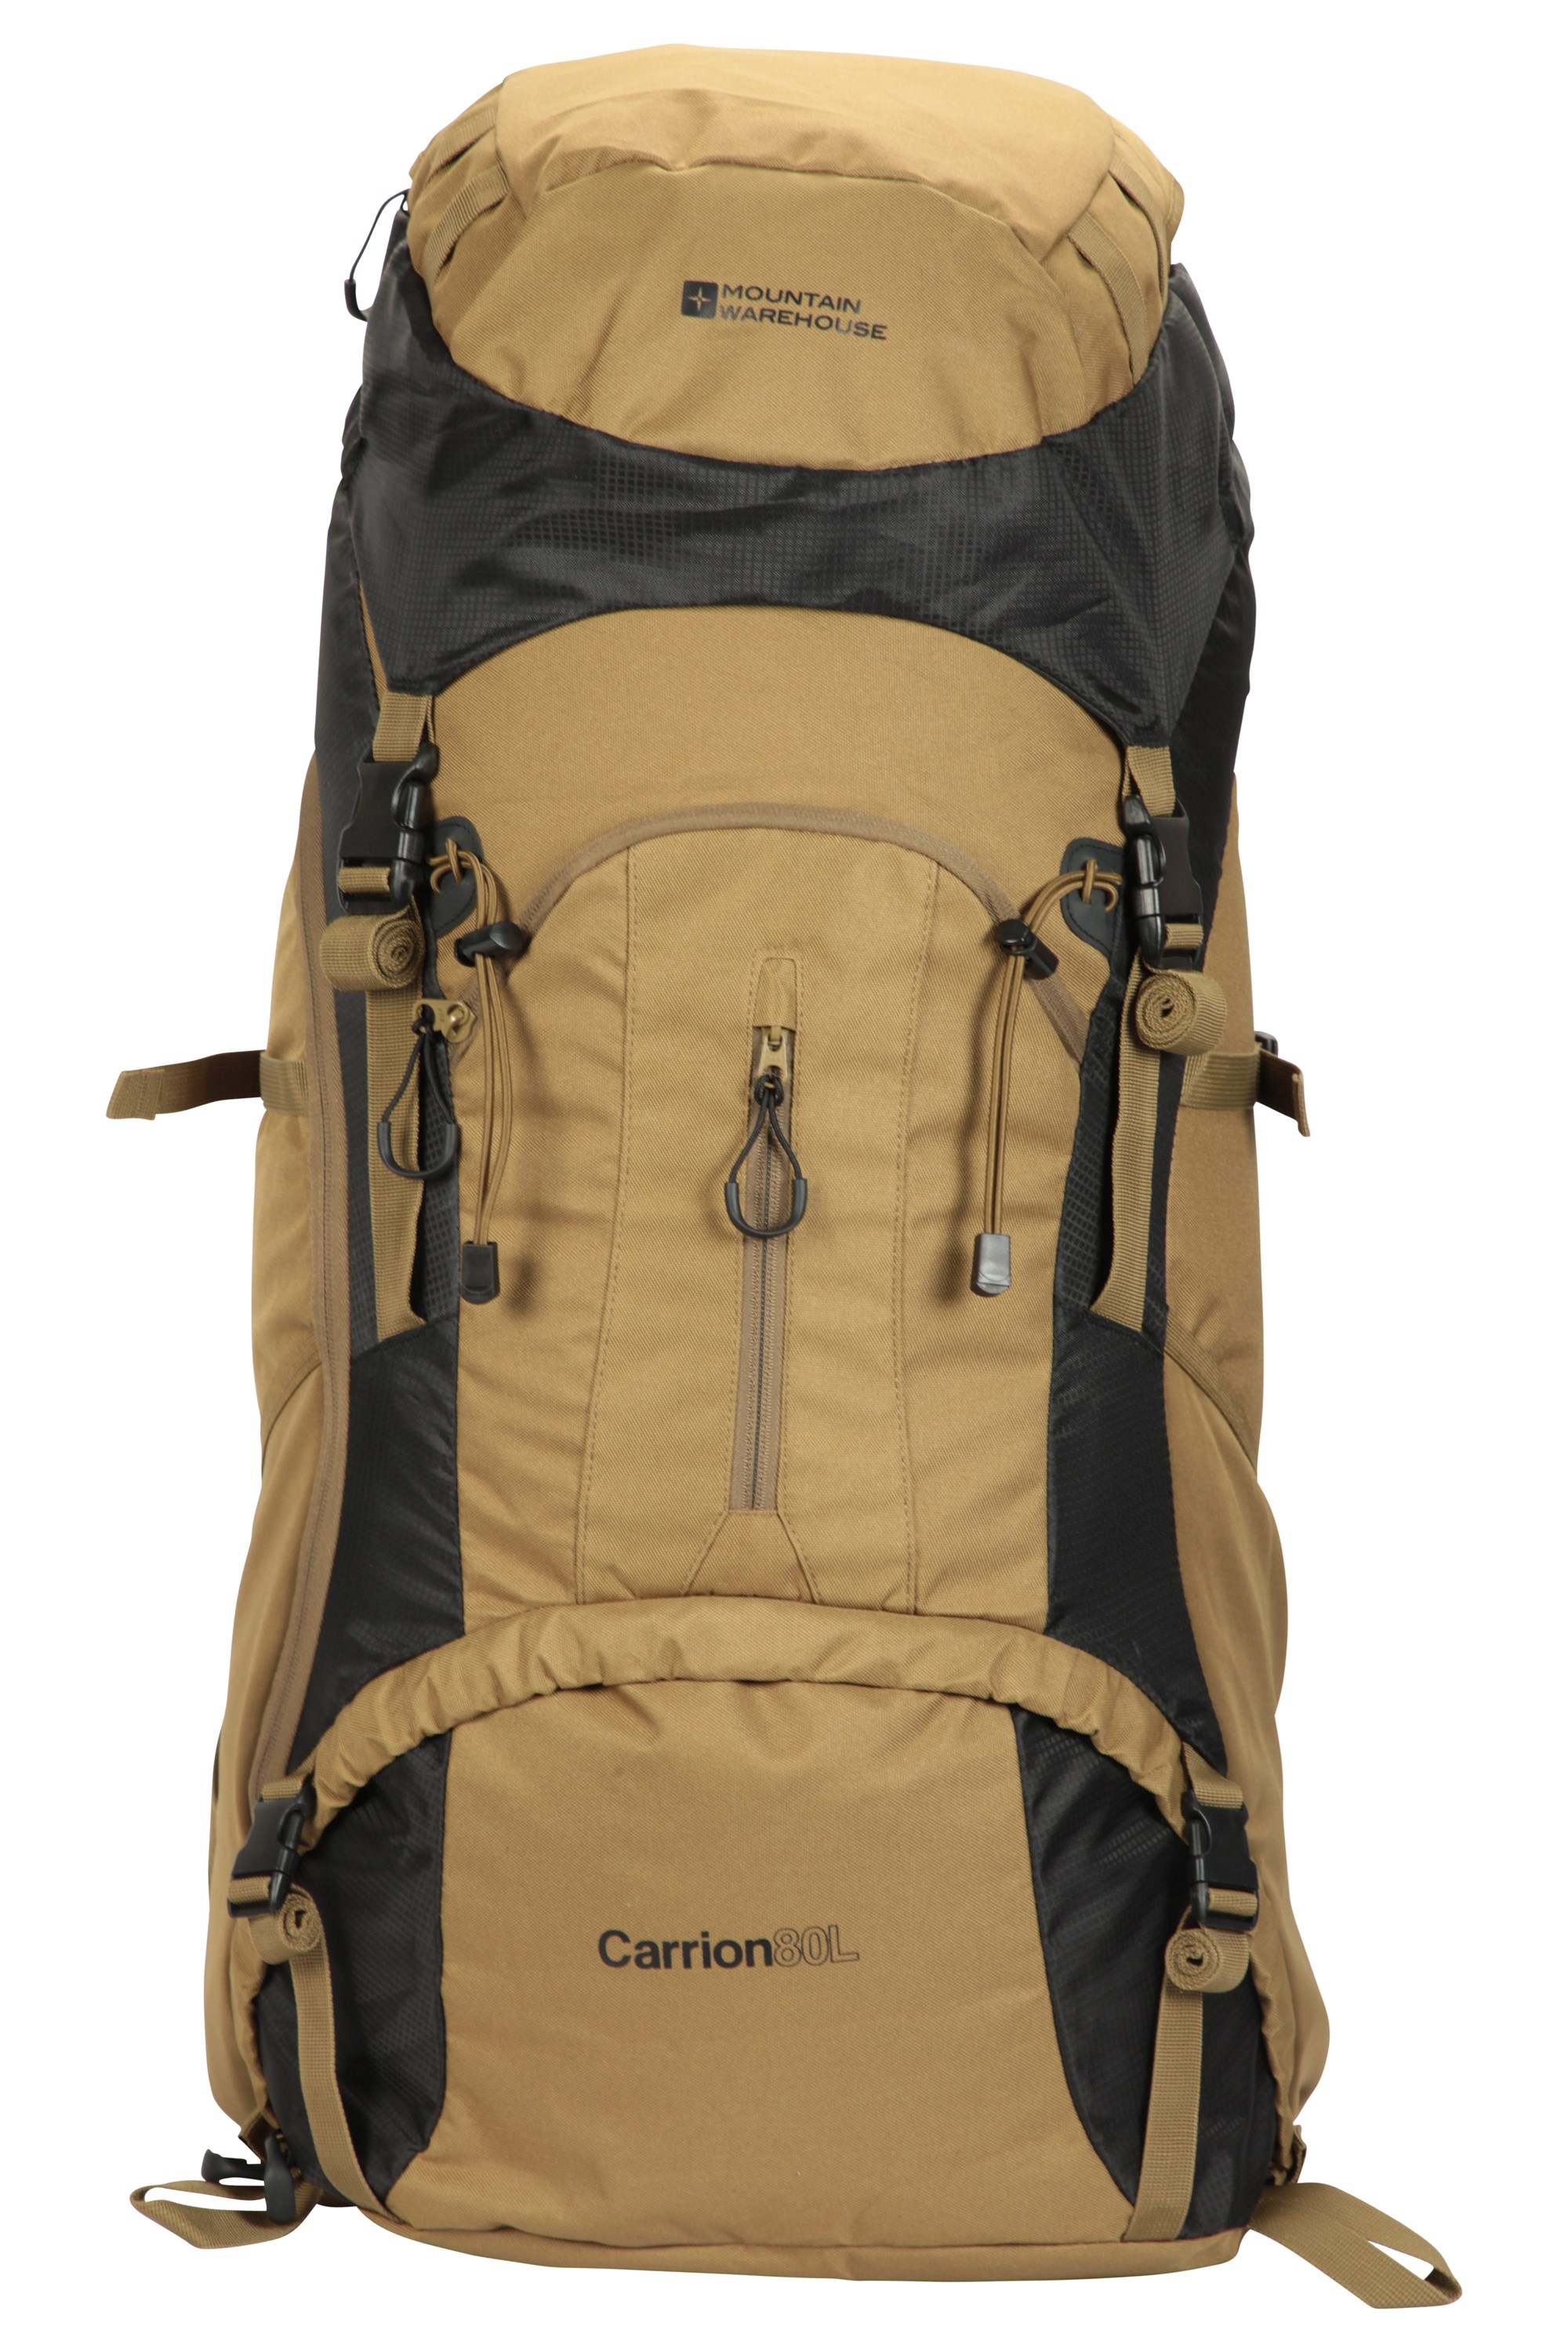 Mountain Warehouse Carrion 80L Backpack Green